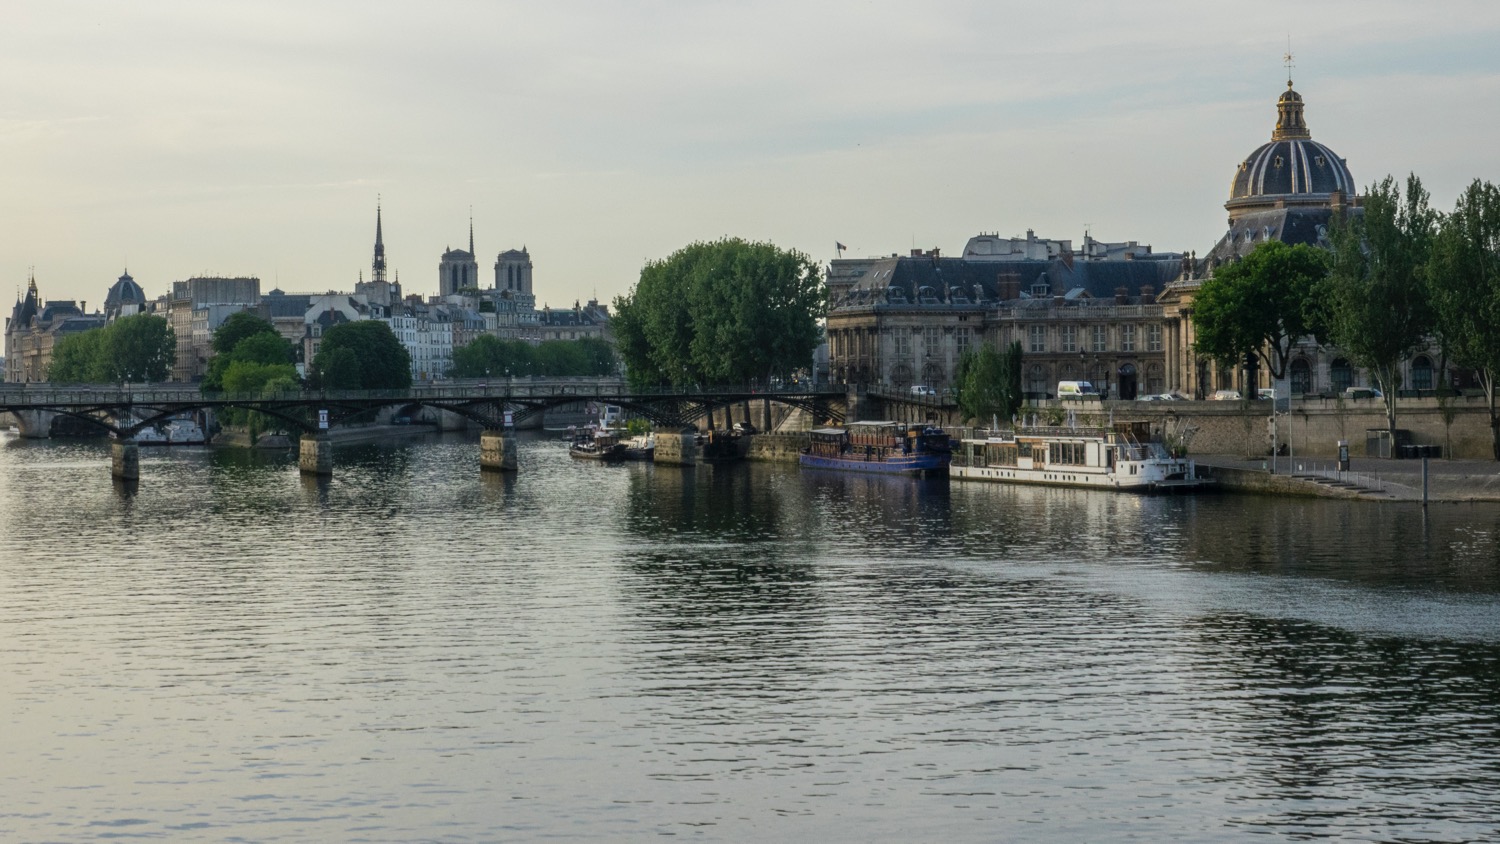 The view towards the Ile de la Cite. You can see Notre Dame in the distance.